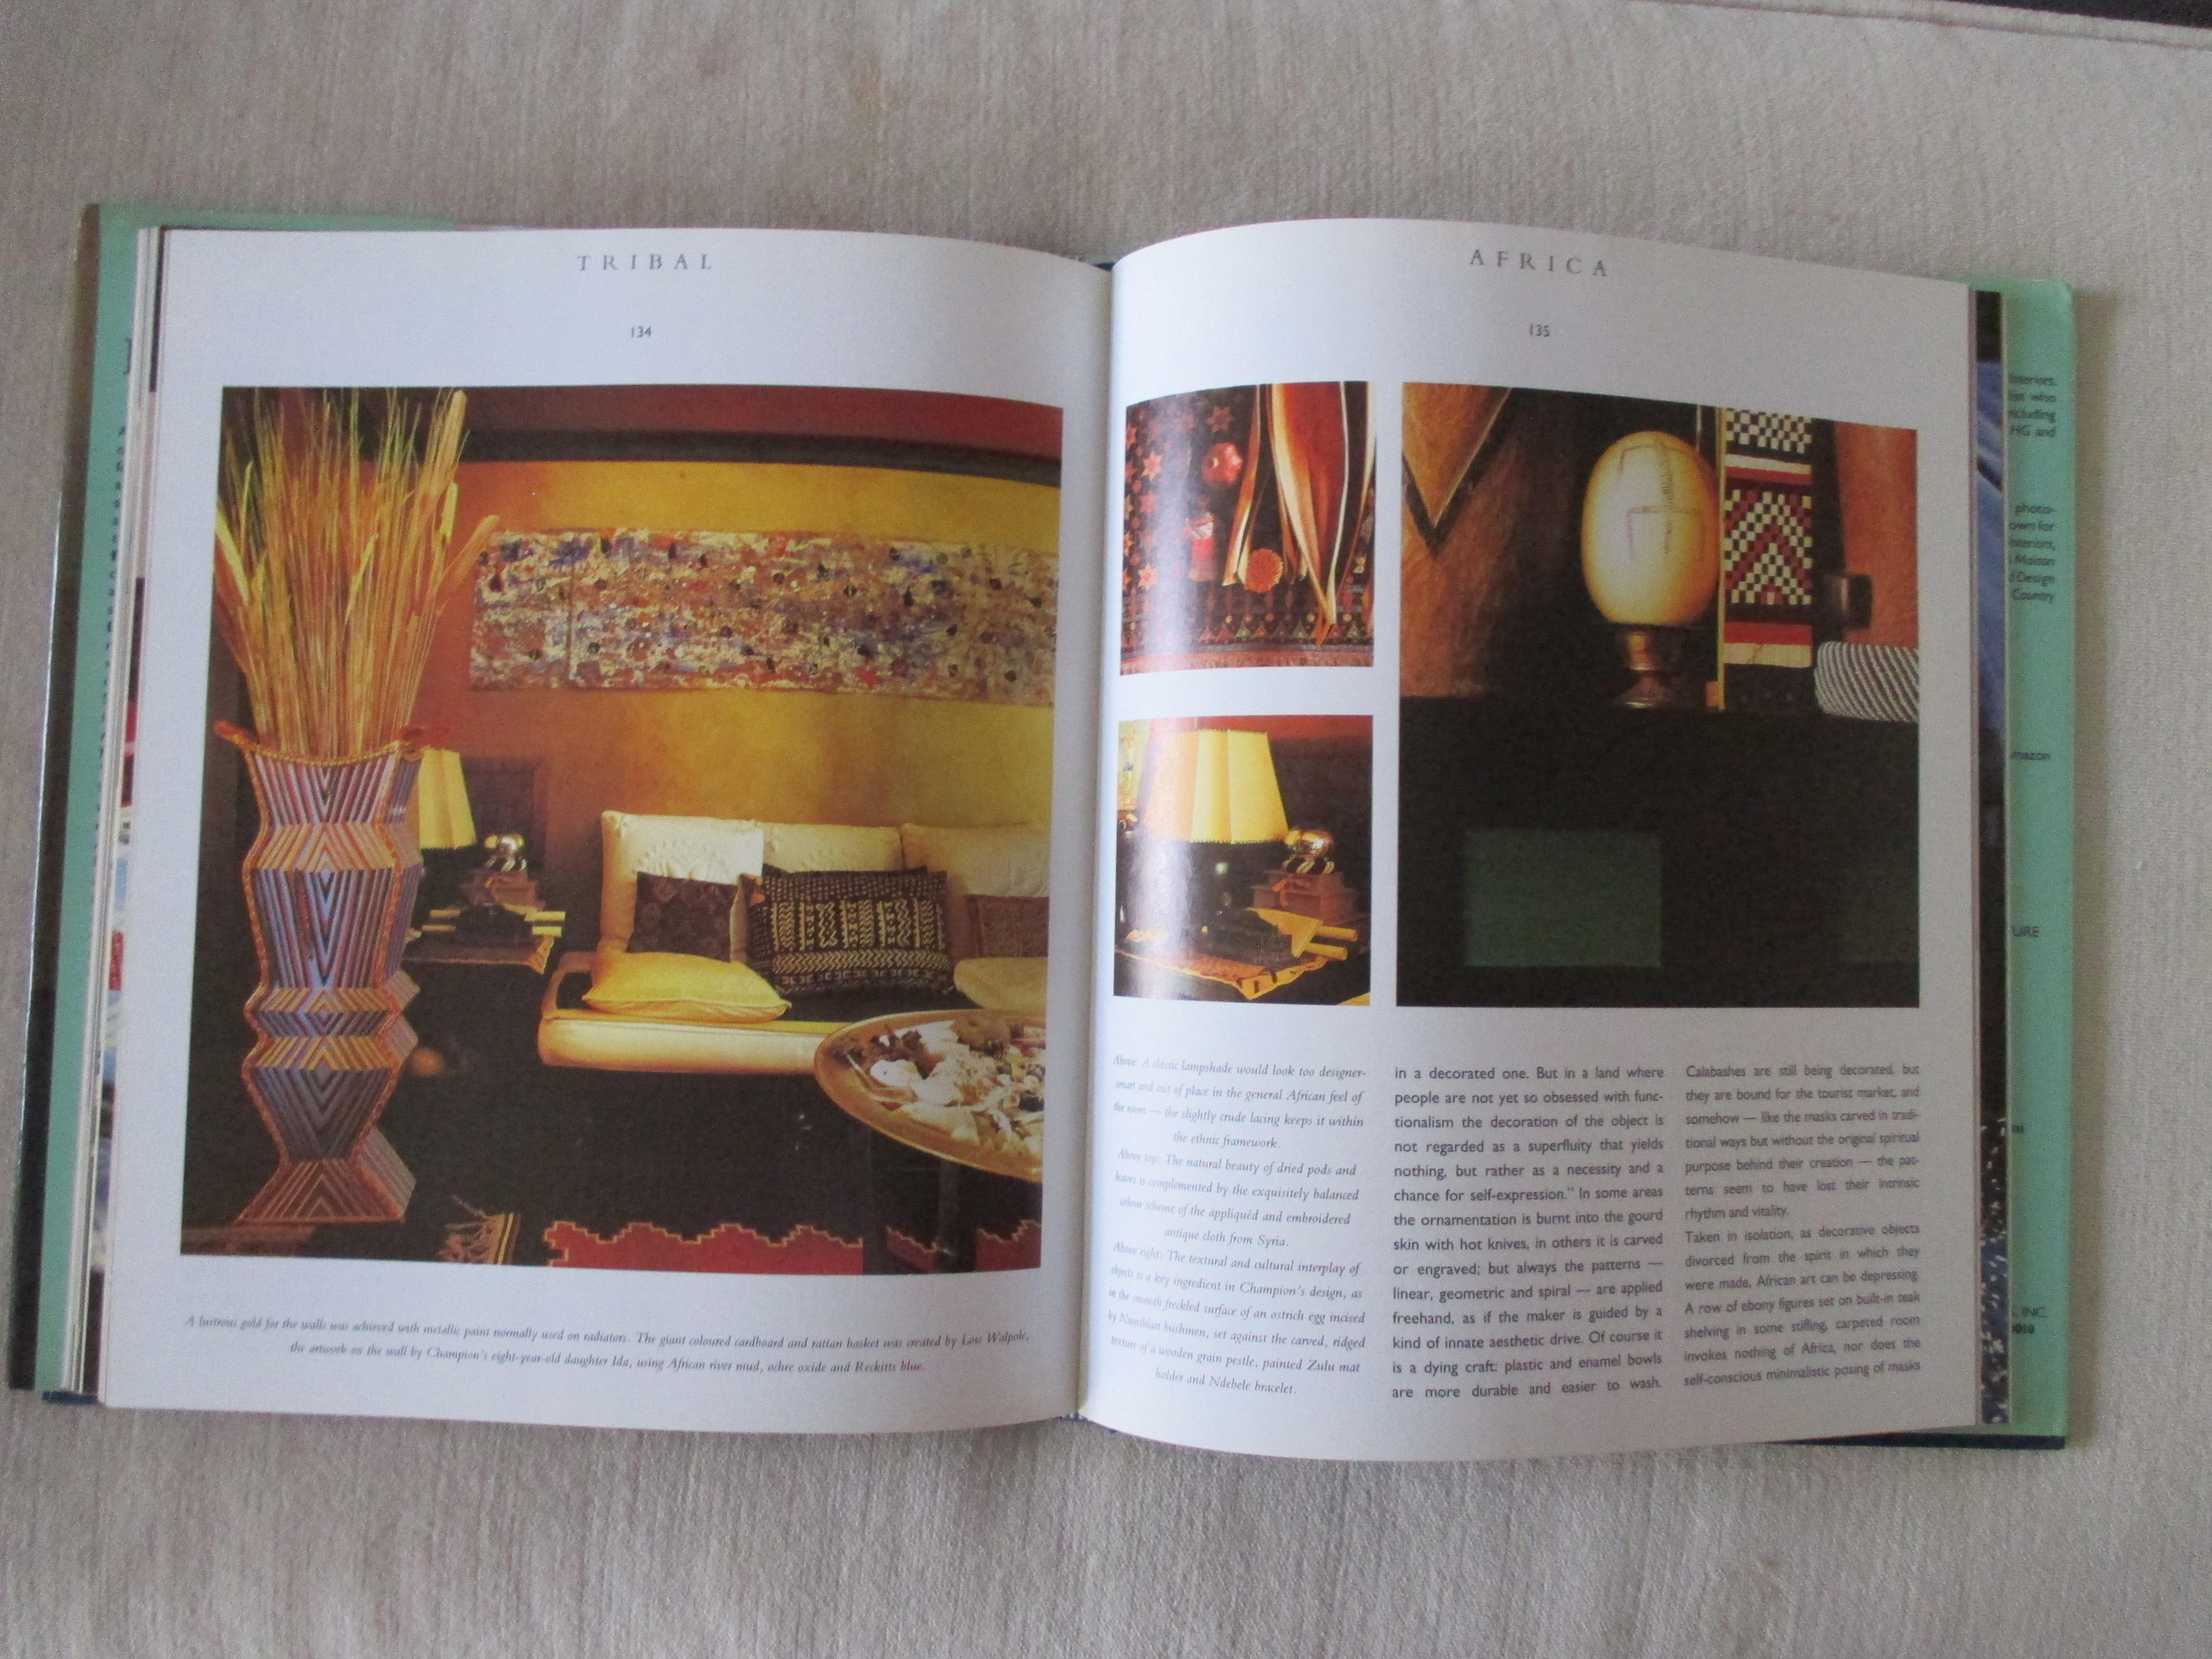 European Ethnic Interiors Hardcover Book by Dina Hall